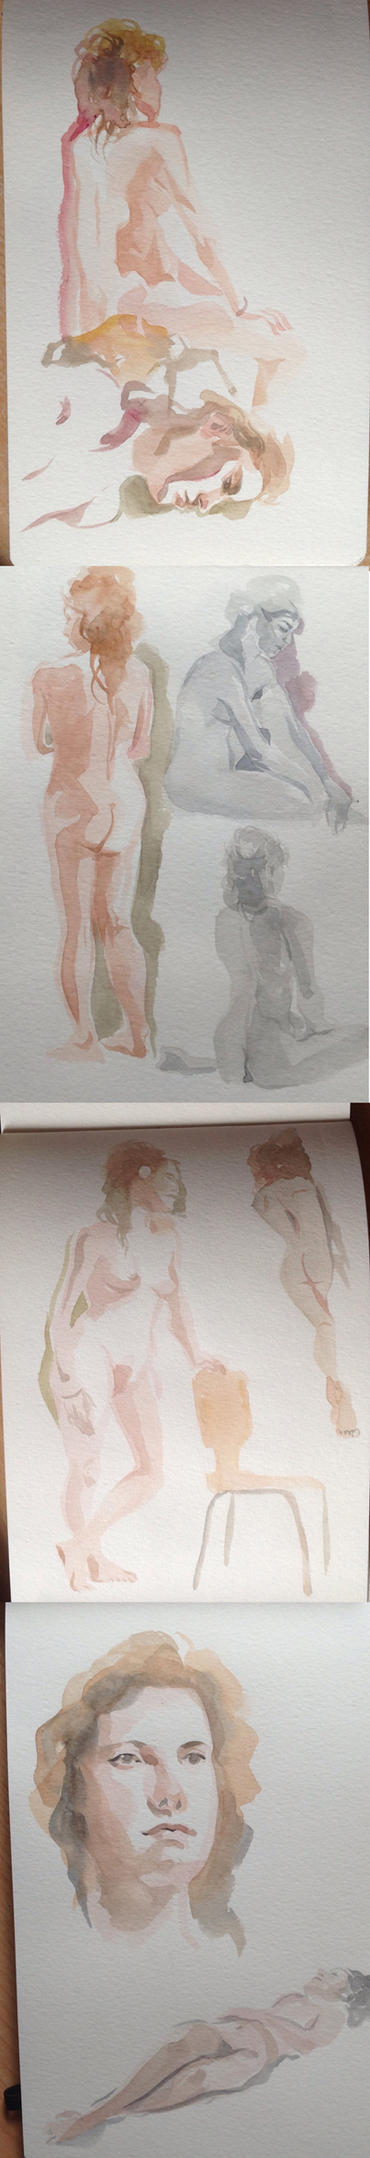 [Image: watercolour_lifedrawing_by_cyprinusfox-d7e9o6y.jpg]